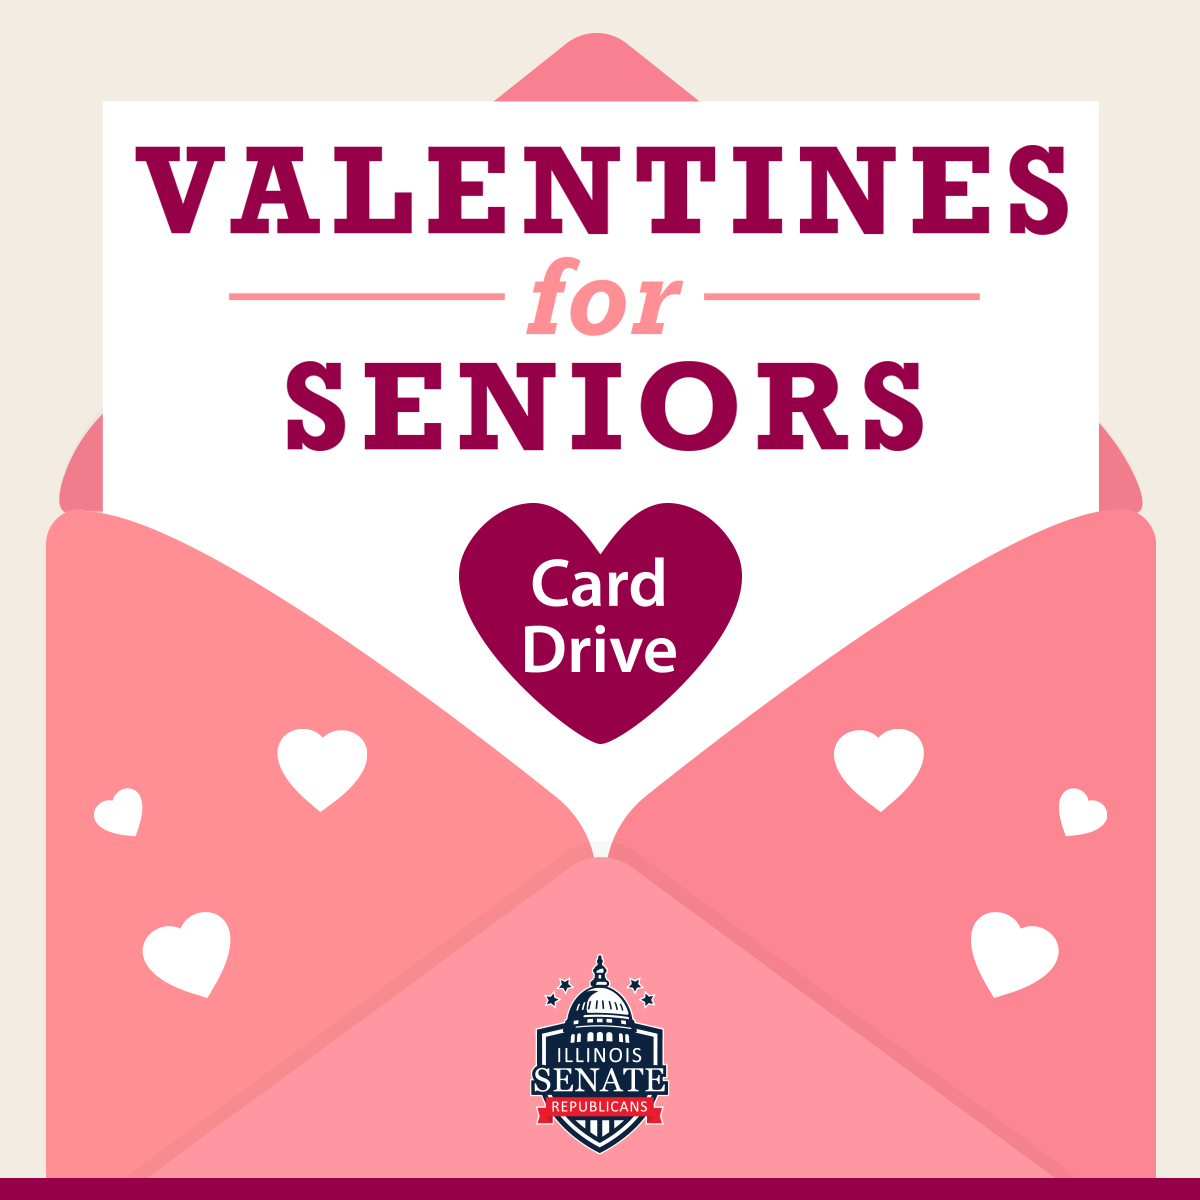 Send Valentines to residents of long-term care facilities!